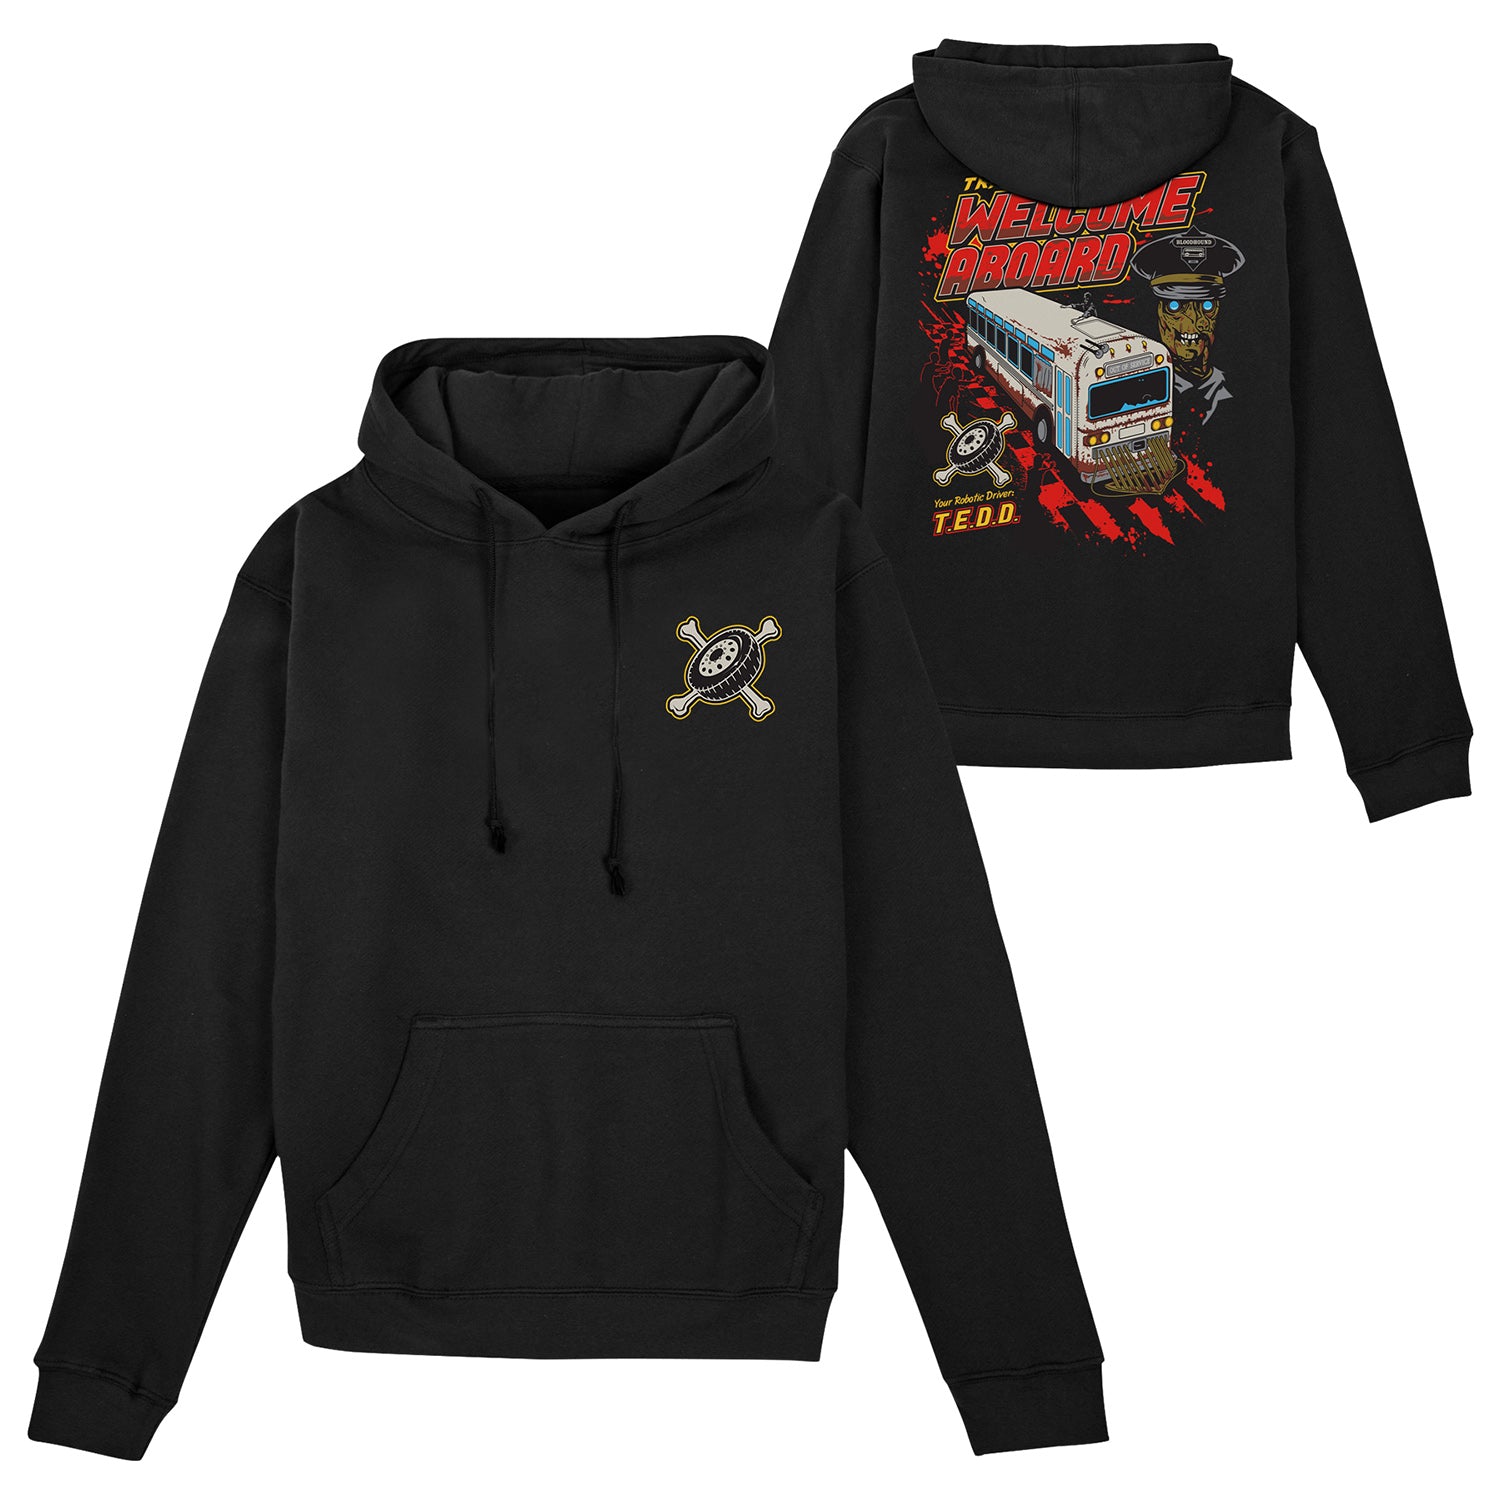 Call of Duty Black Tranzit Welcome Aboard Hoodie - Front and Back View